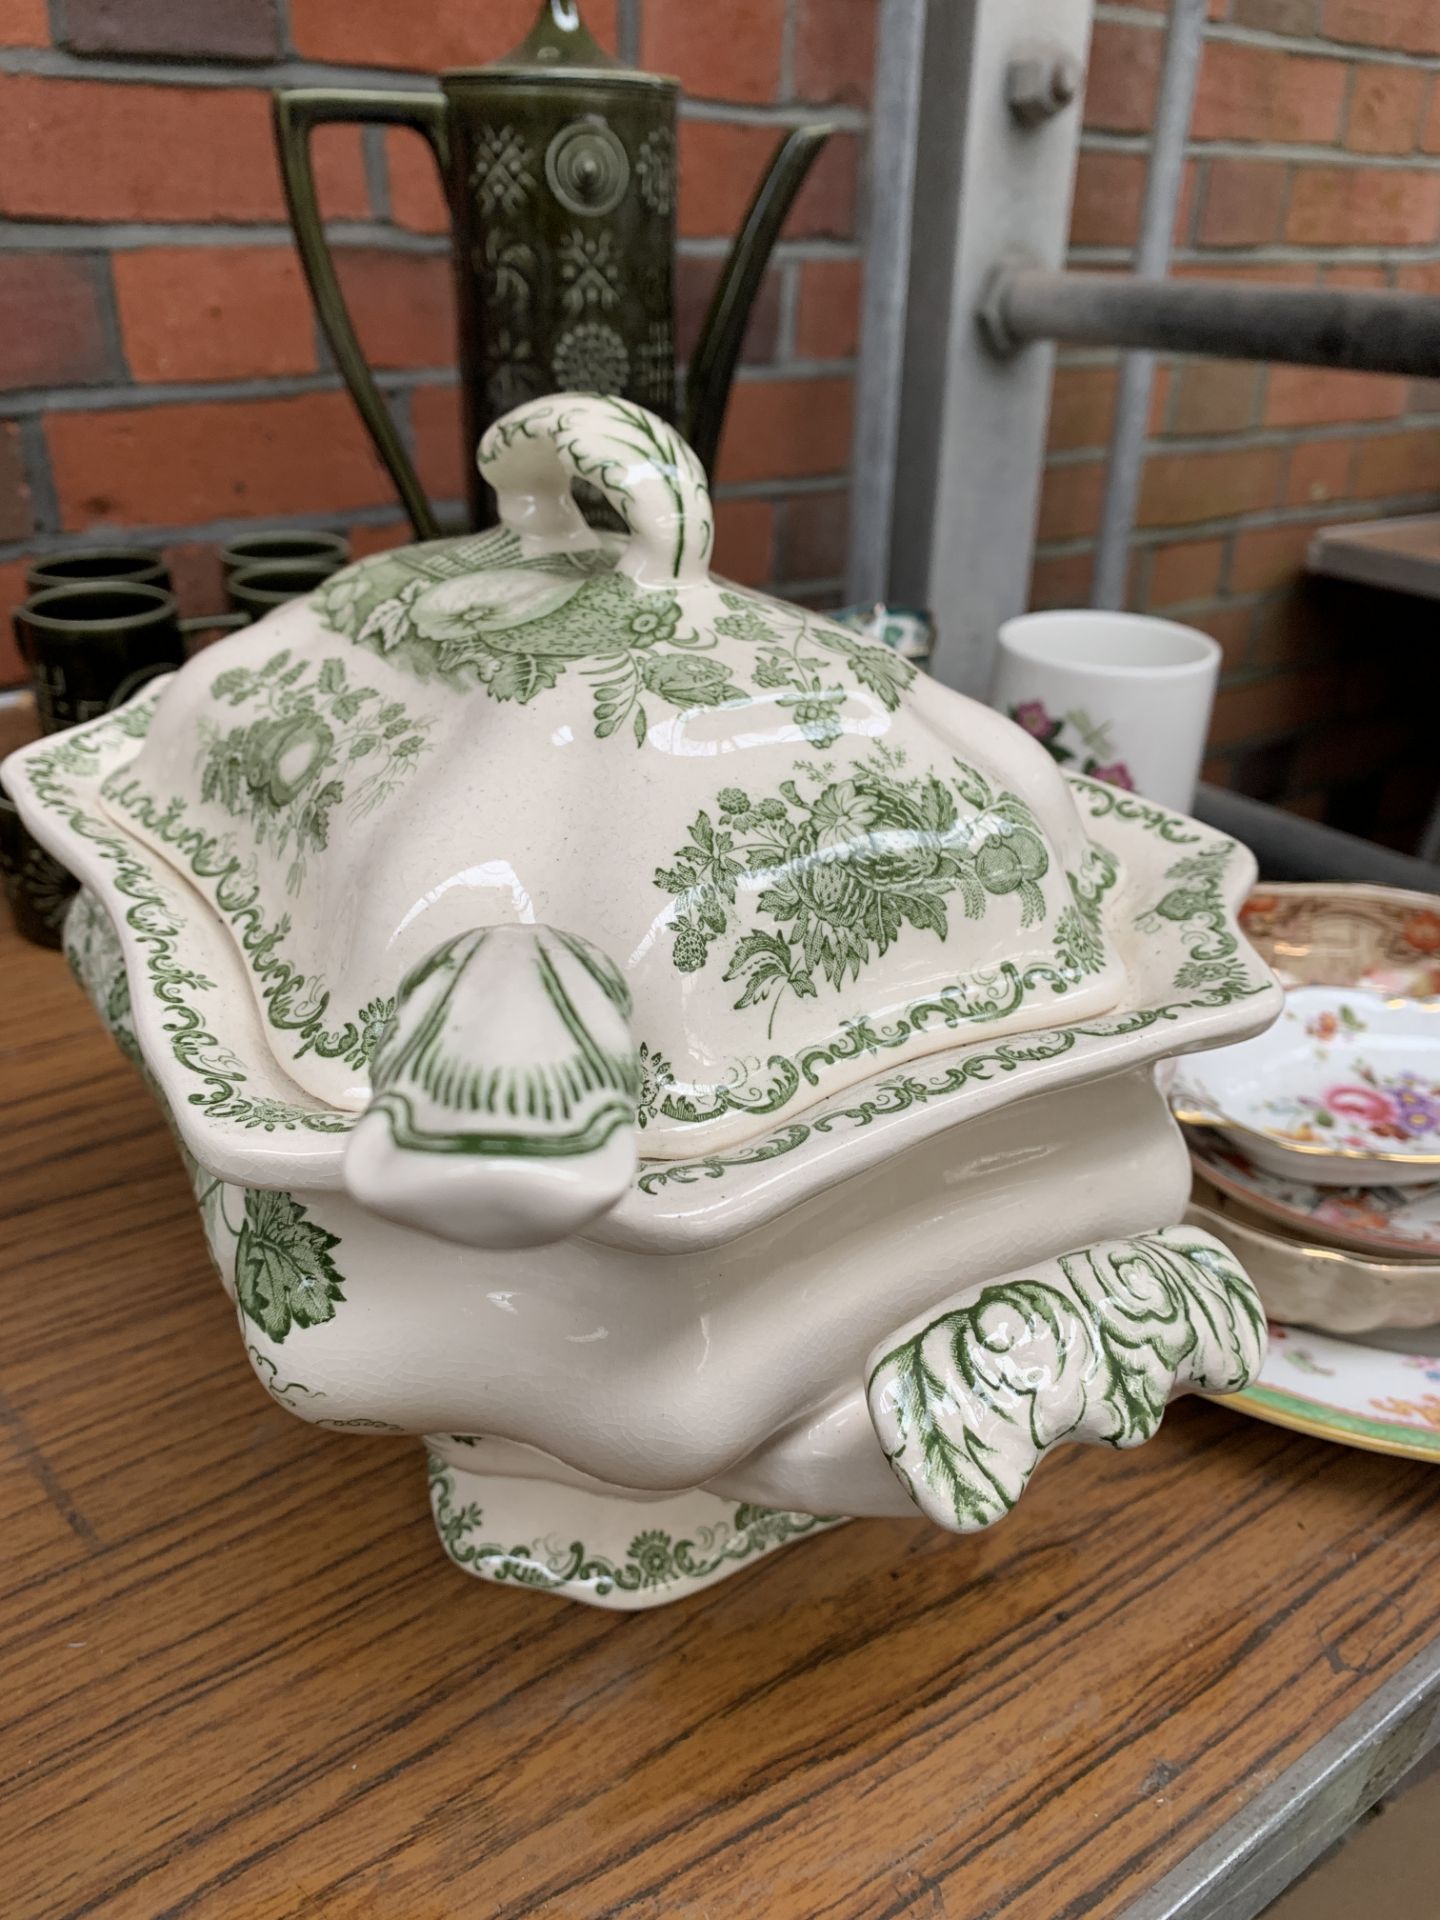 Part Portmeirion green 'Totem' coffee set and other items - Image 3 of 5